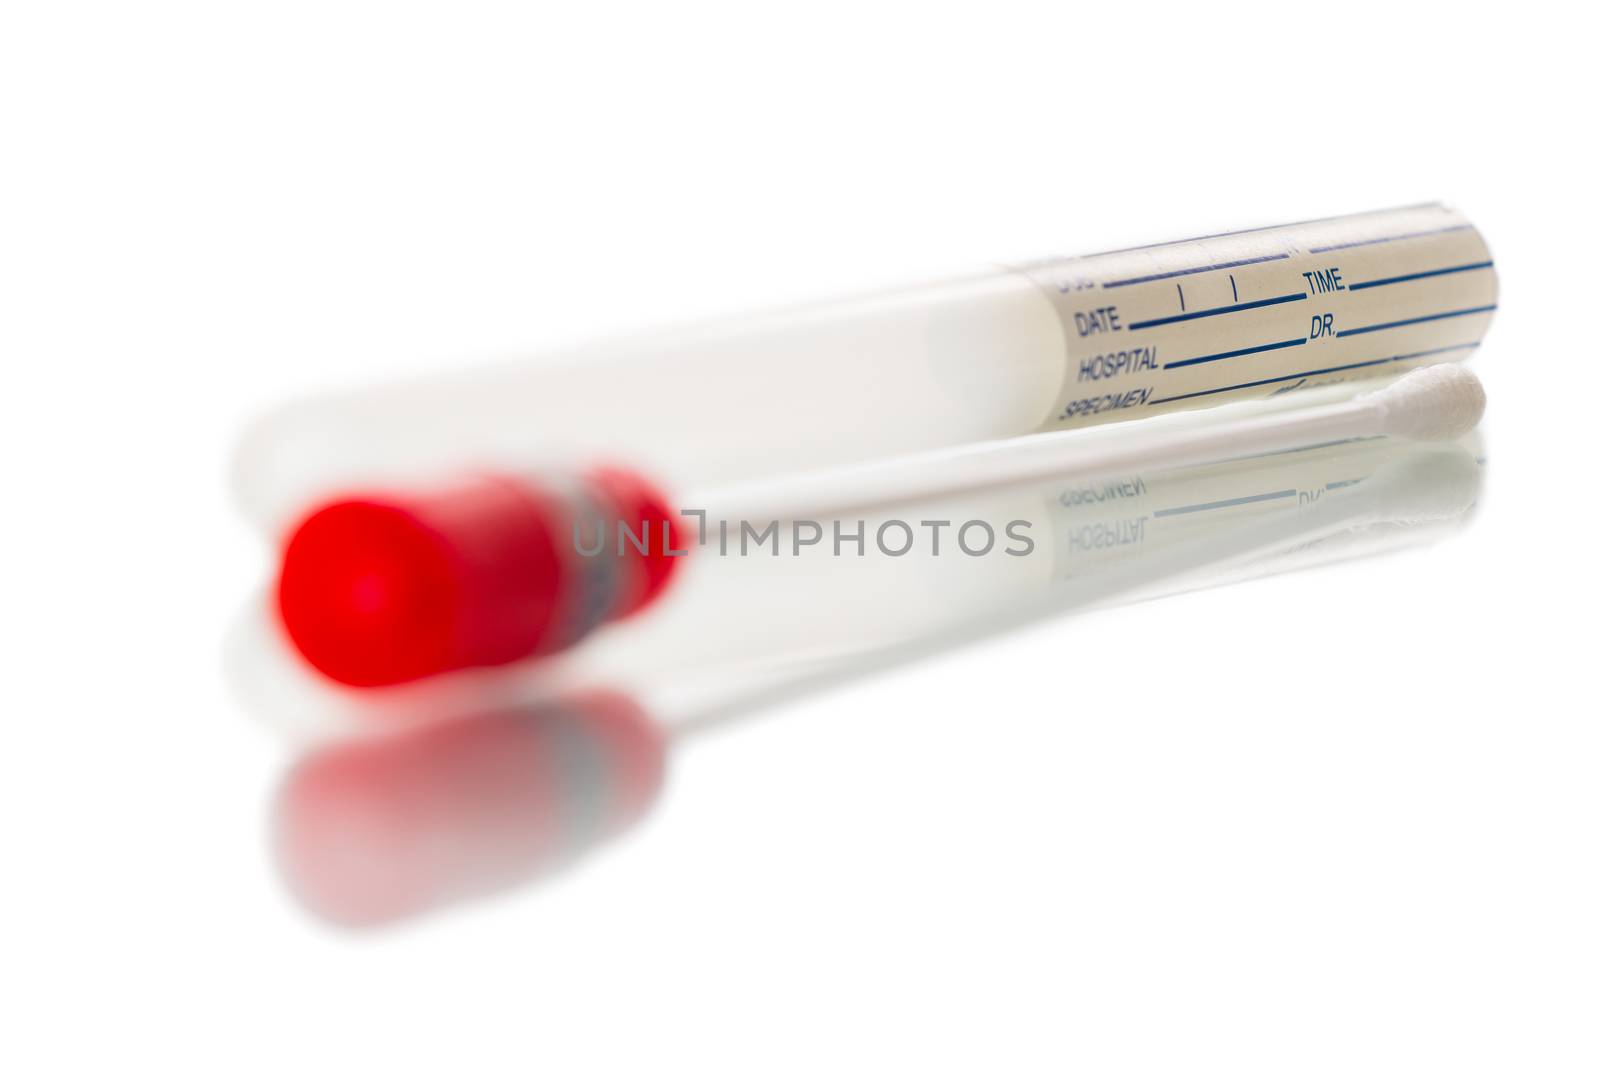 DNA test tube and cotton swab, wipe test